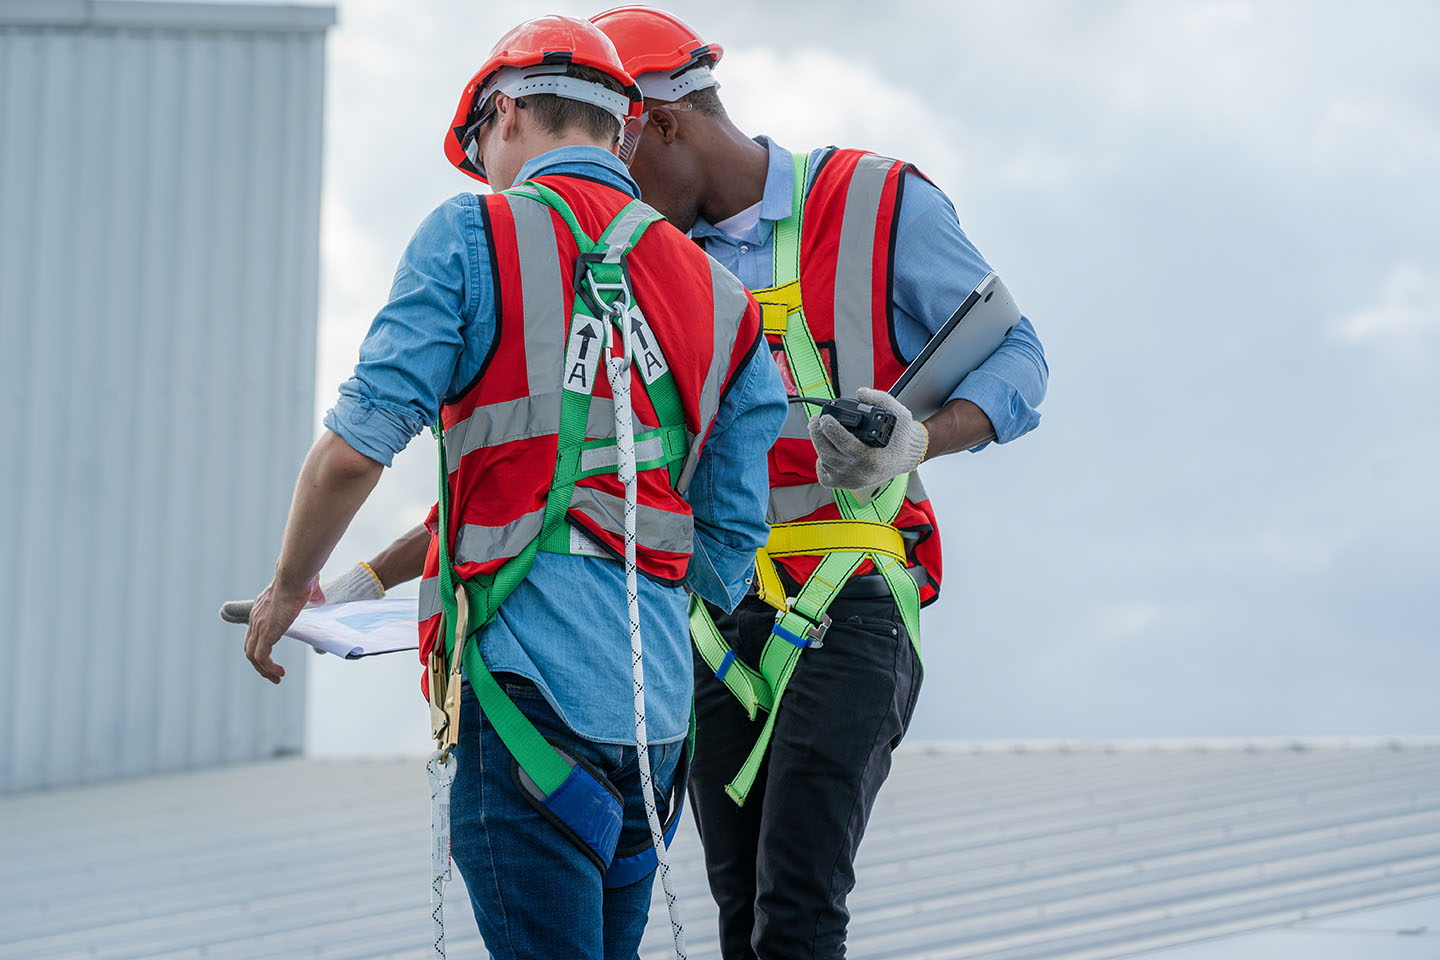 Construction worker wearing safety harness and safety line,Equipment of industrial worker high place of building,Climbing equipments before starting job,Rope laborer access.